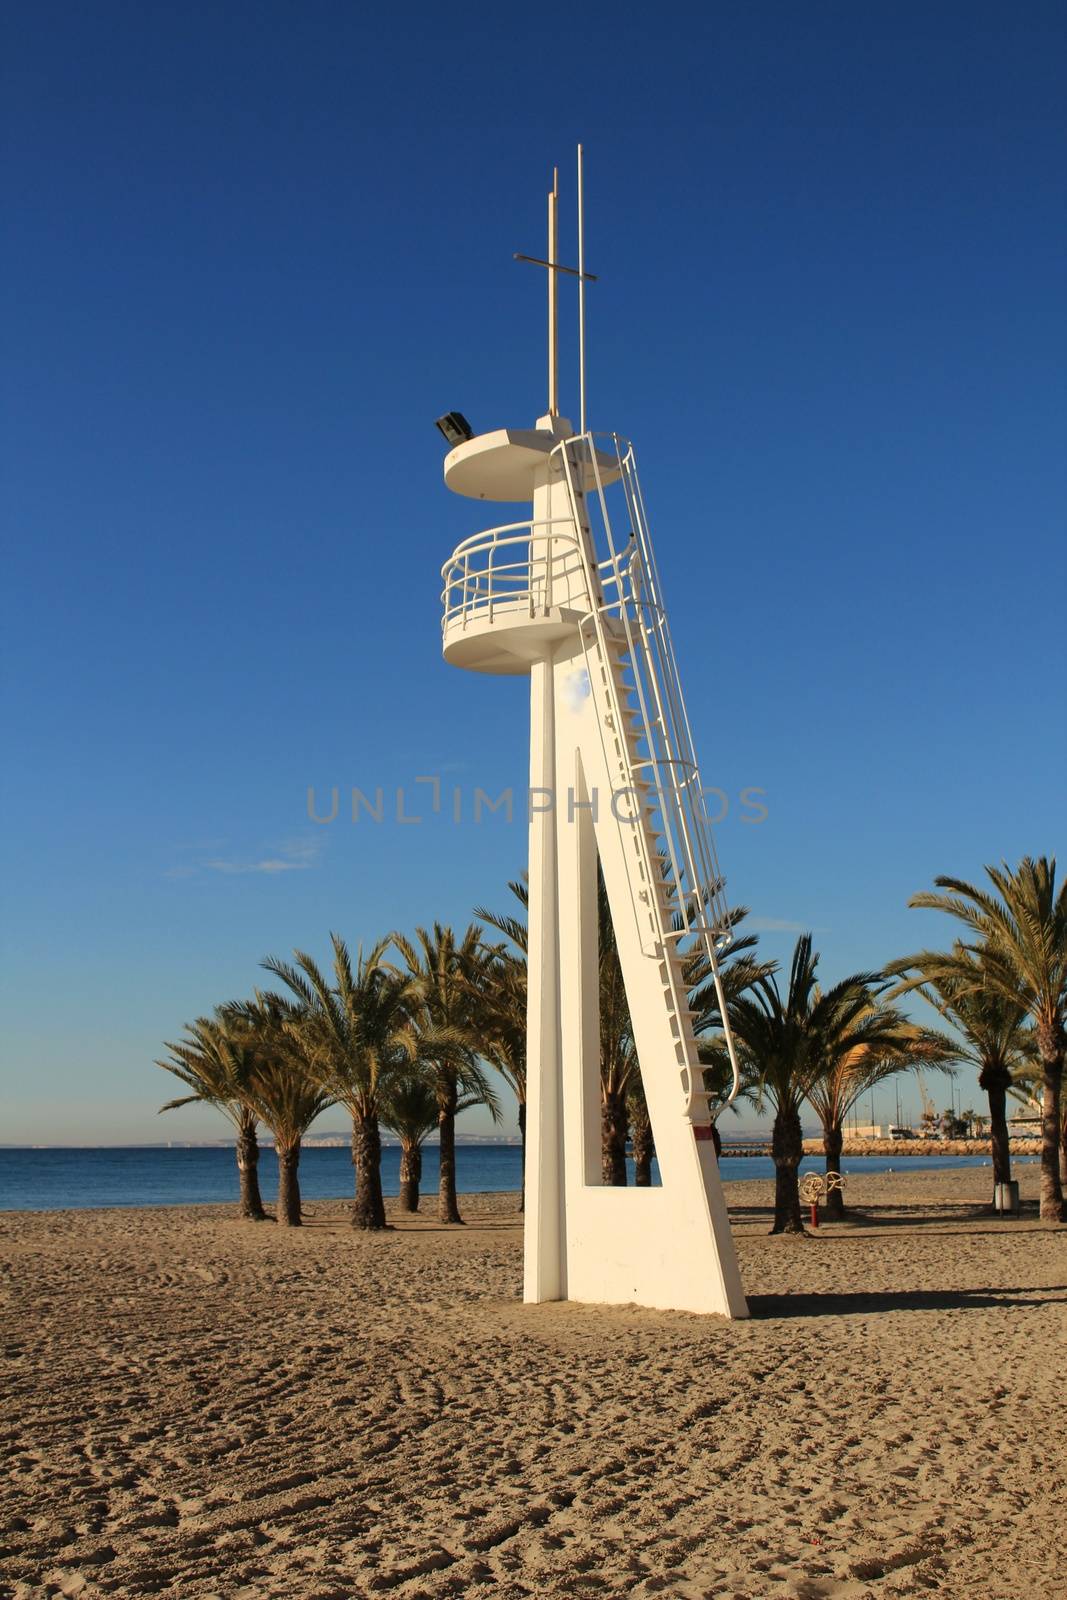 Santa Pola, Spain- February 16, 2018: Lifeguard tower on a quiet and lonely beach in a sunny day in southern Spain, Alicante. Palm trees in the background.